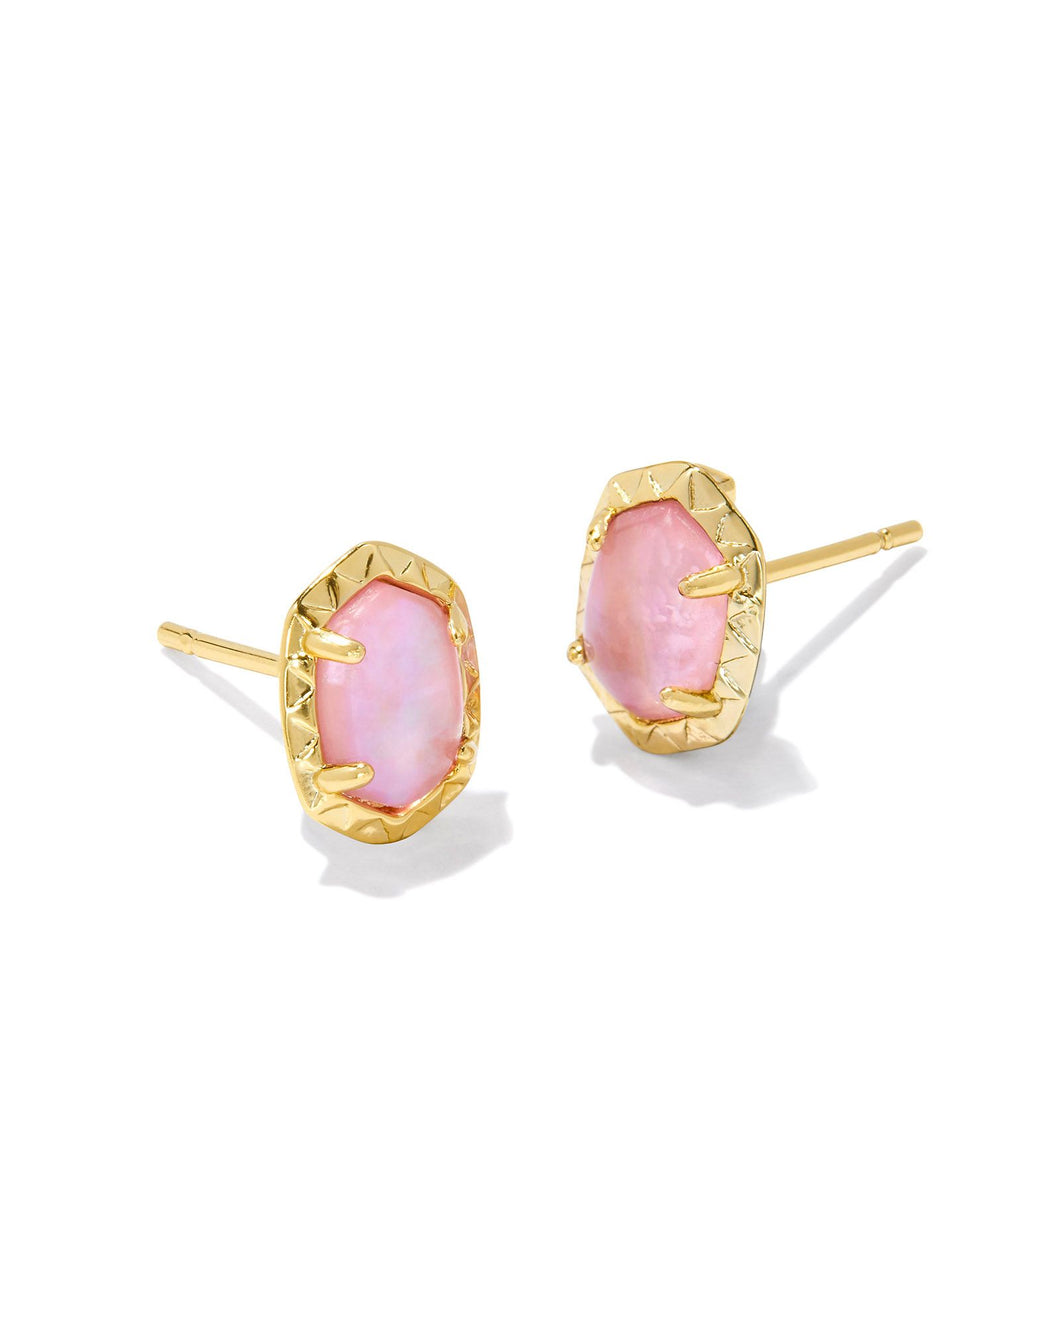 Daphne Gold Stud Earrings in Light Pink Iridescent Abalone